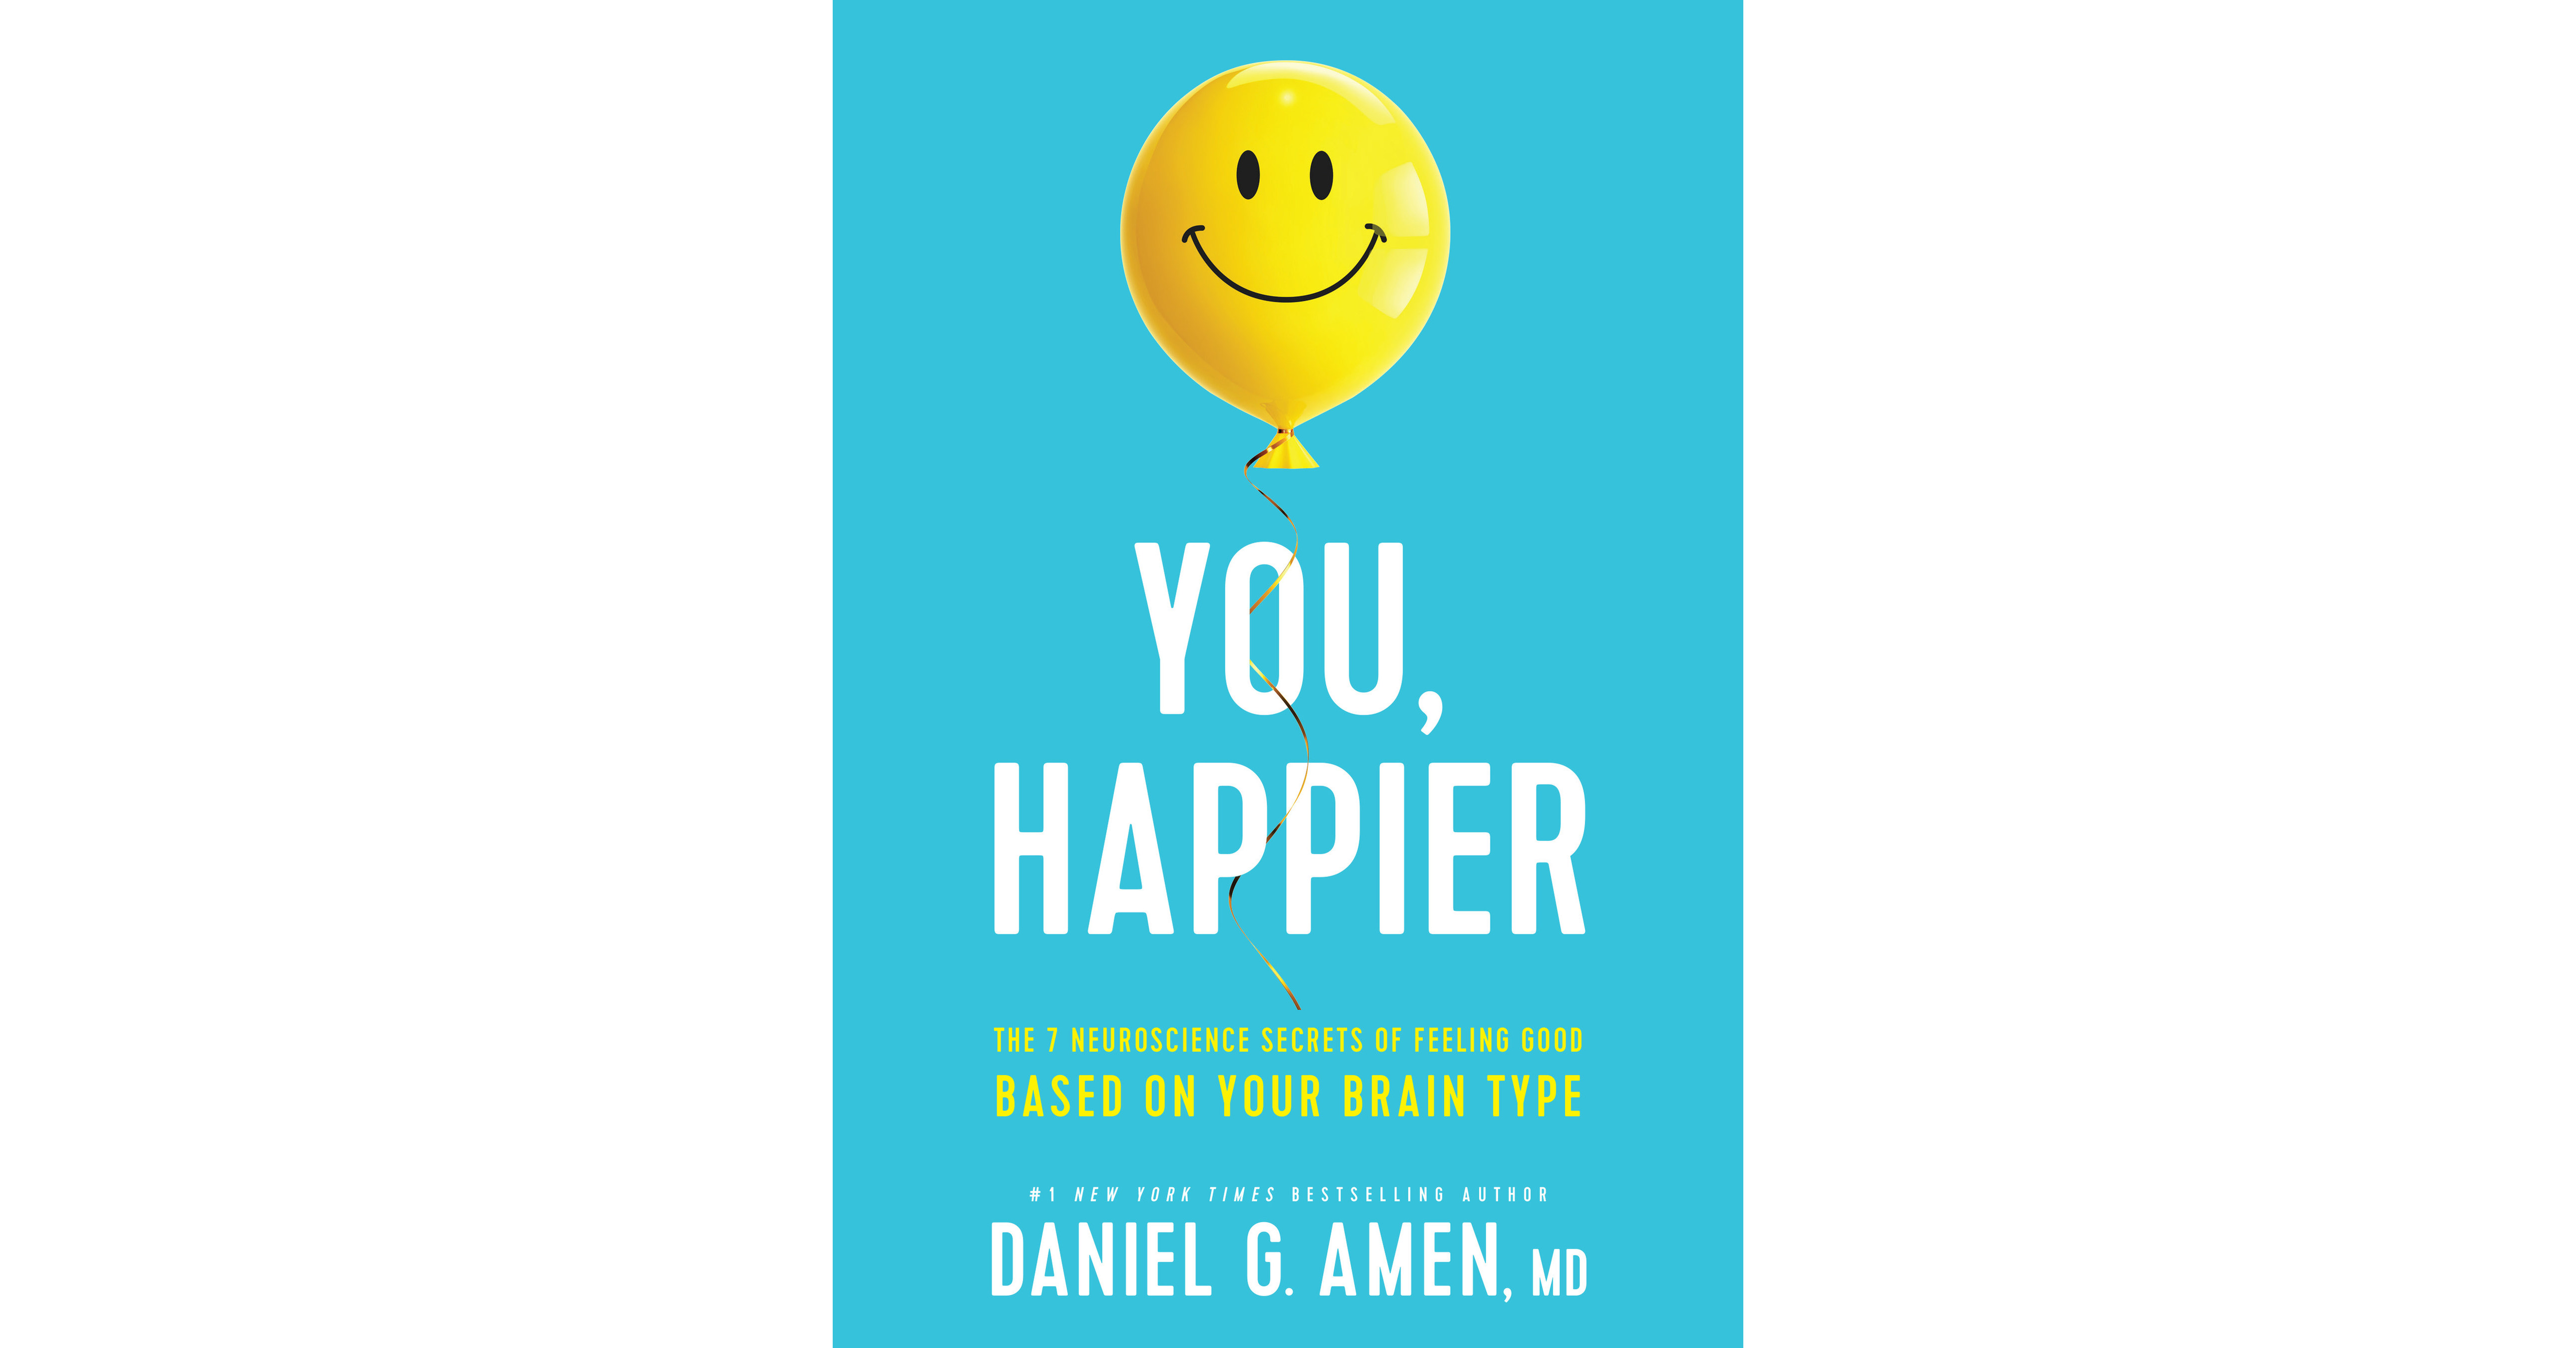 Daniel G. Amen, MD releases new book You, Happier: The 7 Neuroscience  Secrets of Feeling Good Based on Your Brain Type